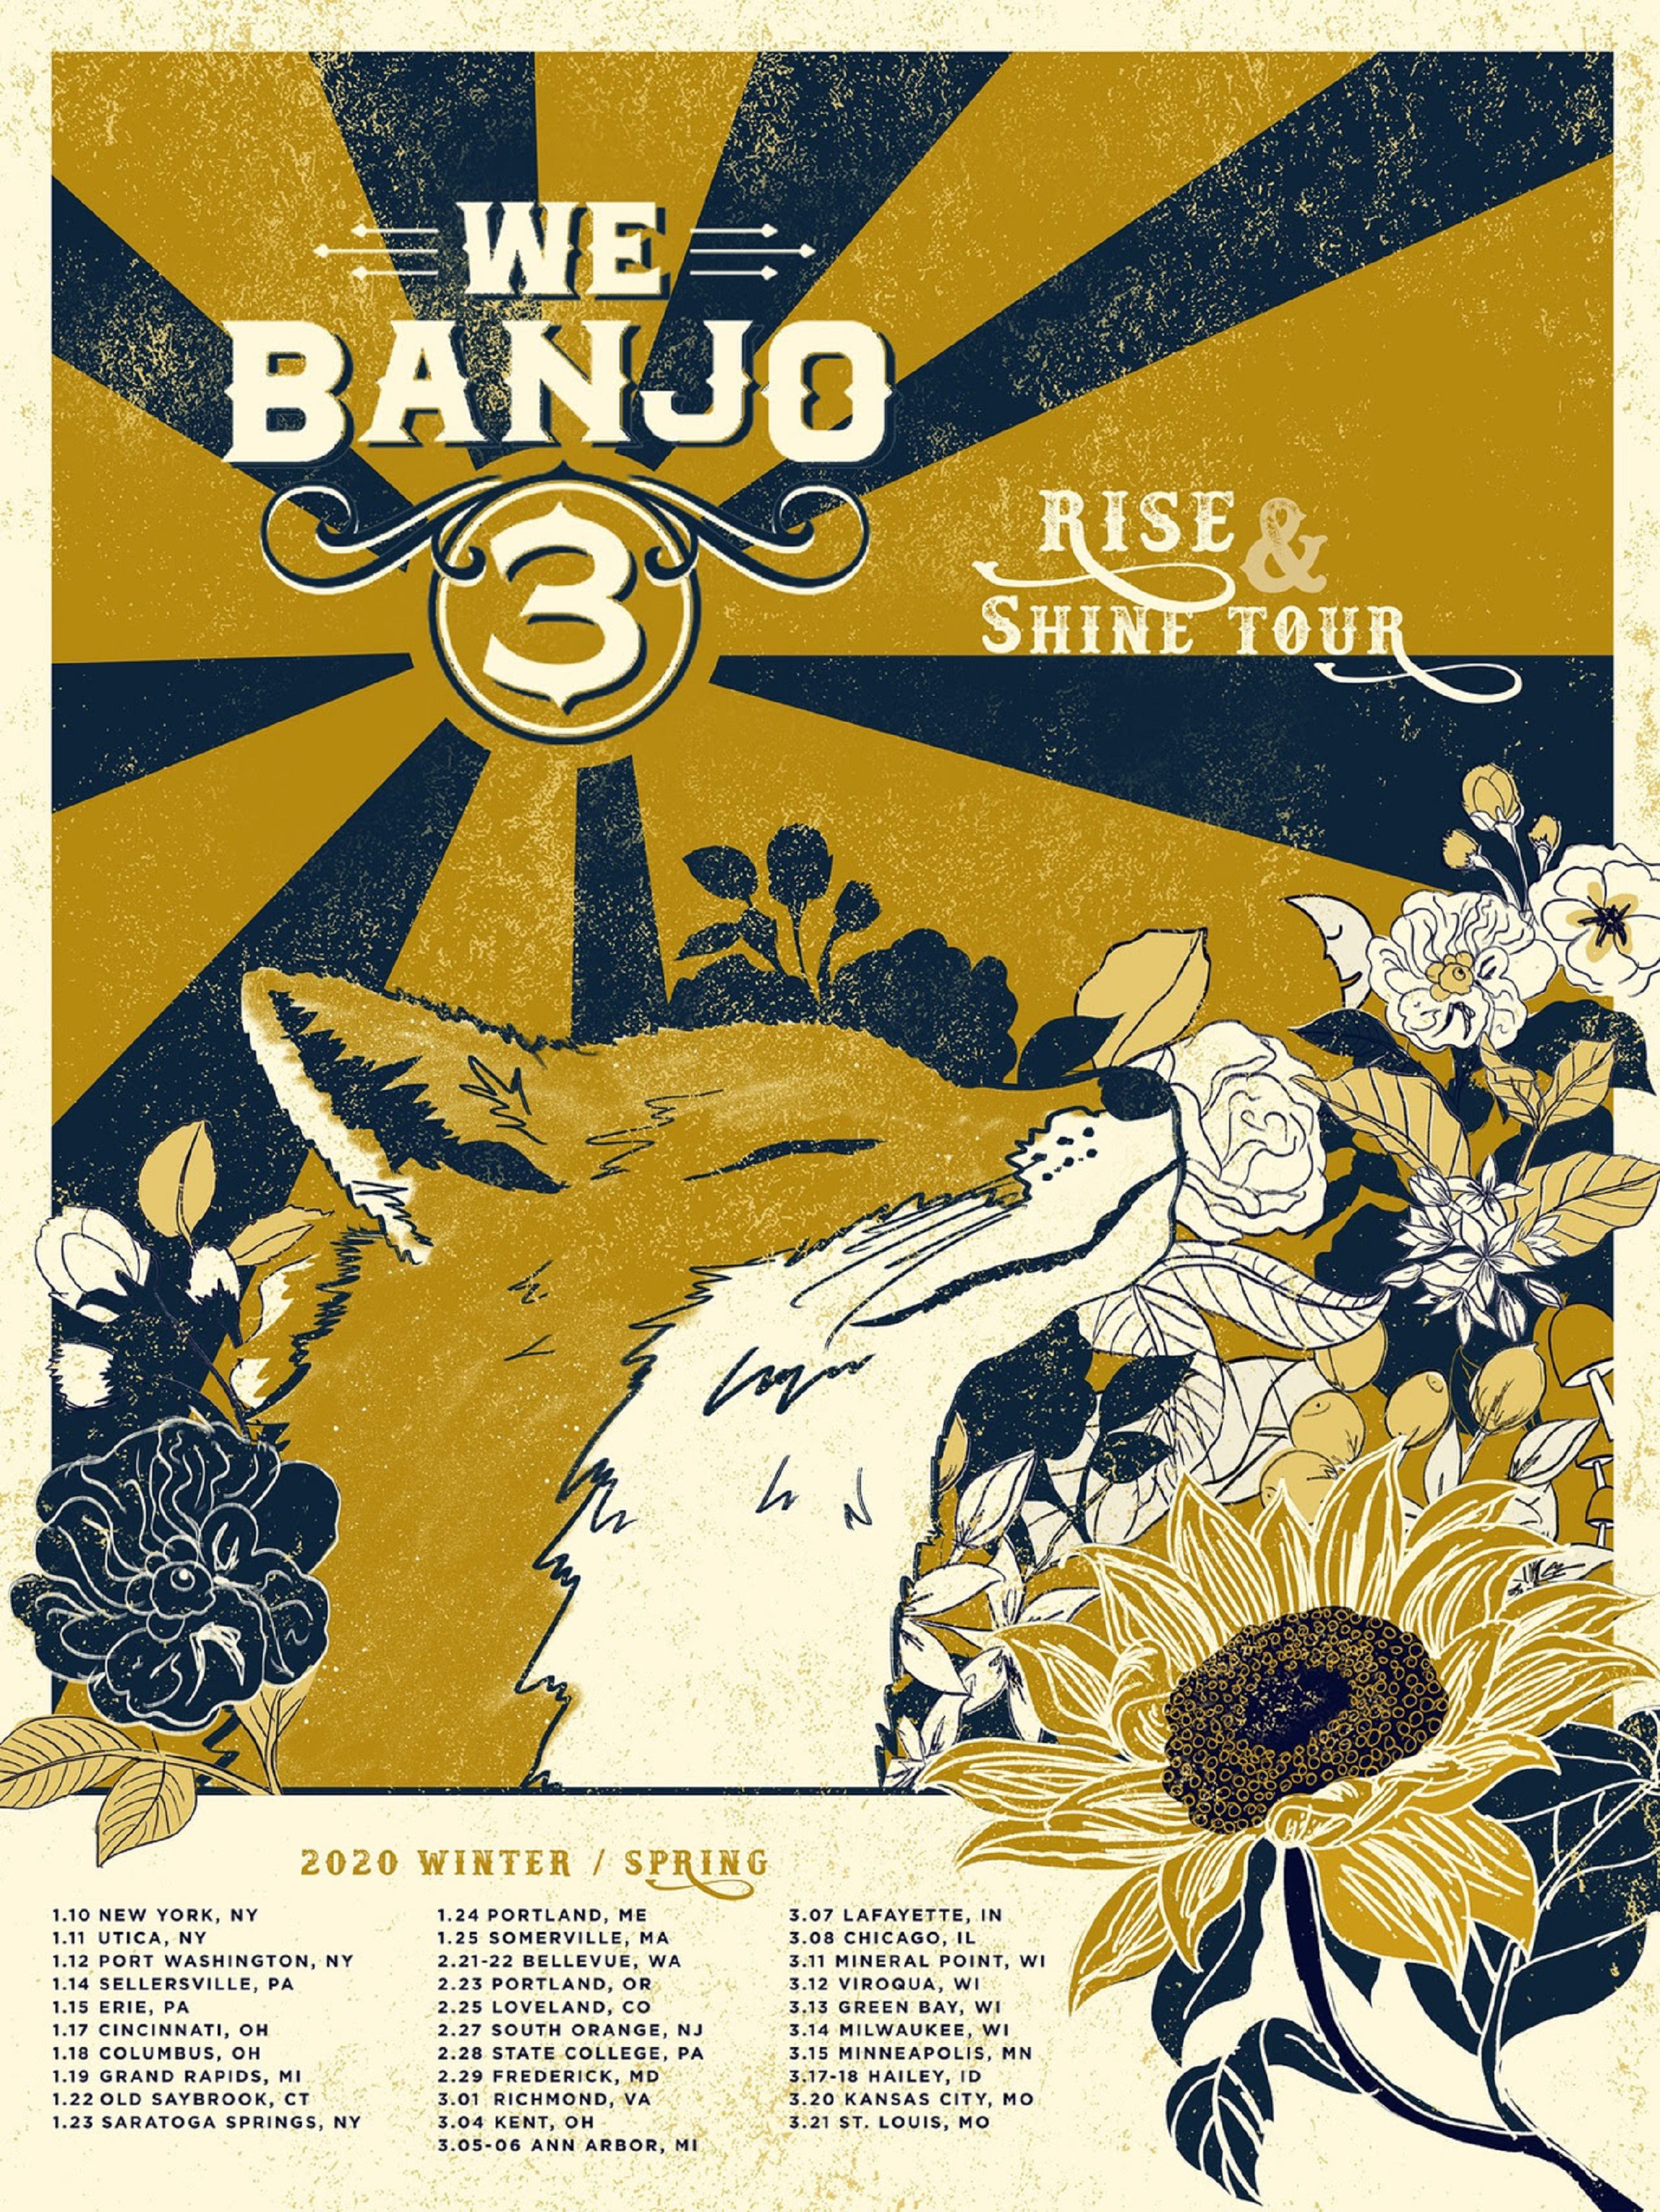 WE BANJO 3 to perform at Rialto Theater on Tuesday, February 25th